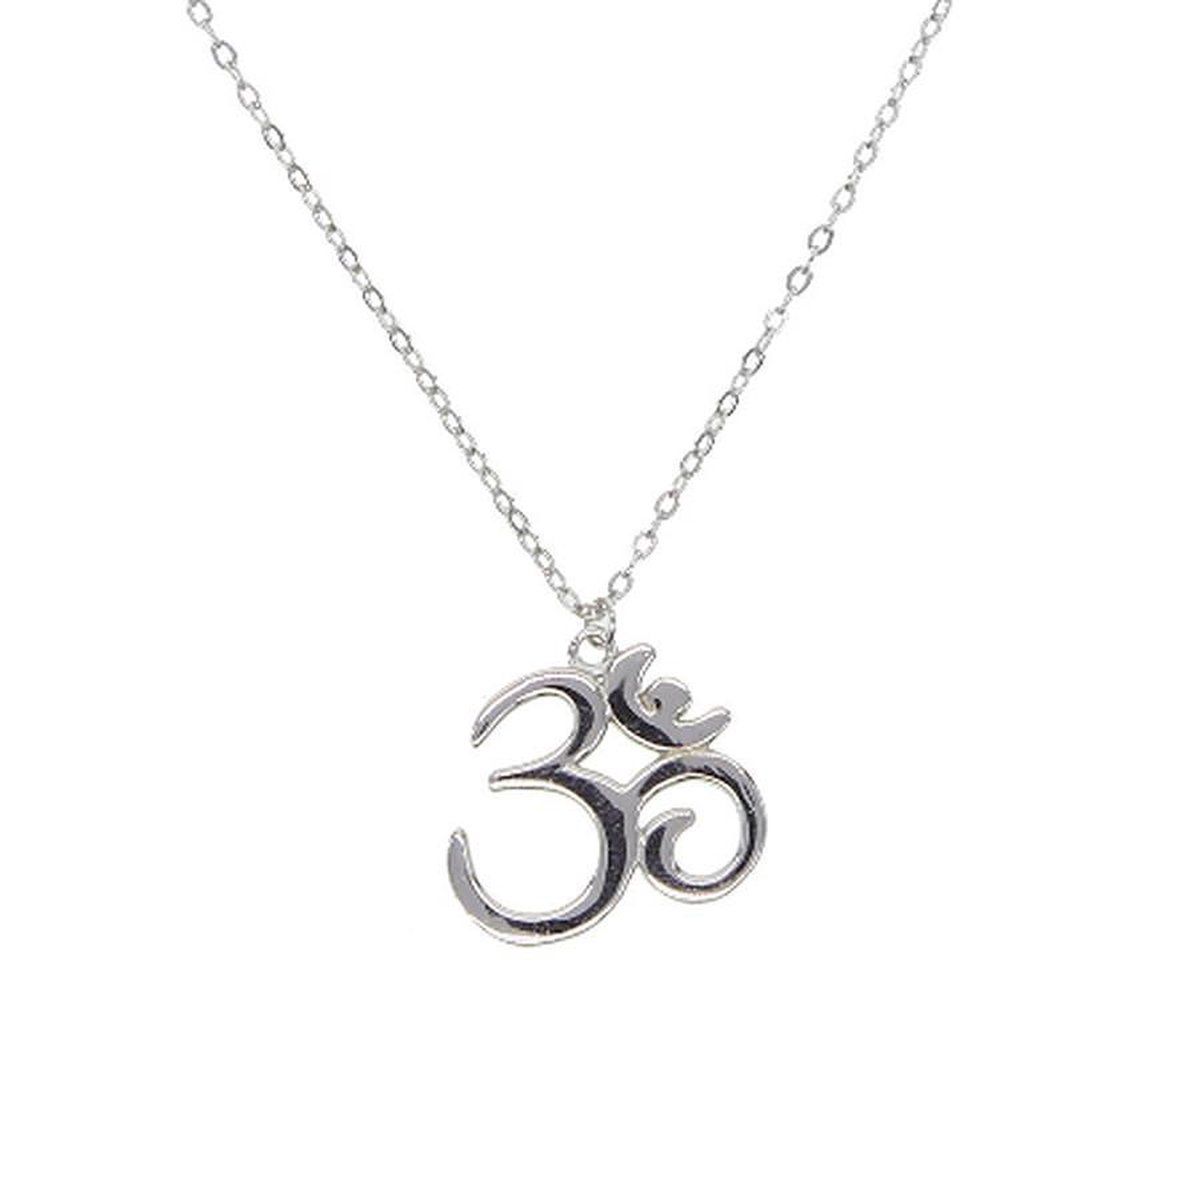 N3 Collecties 925 Sterling Zilveren 41 + 5 Cm Ketting Vrouwen 'Ohm Om' Yoga Symbool Ketting